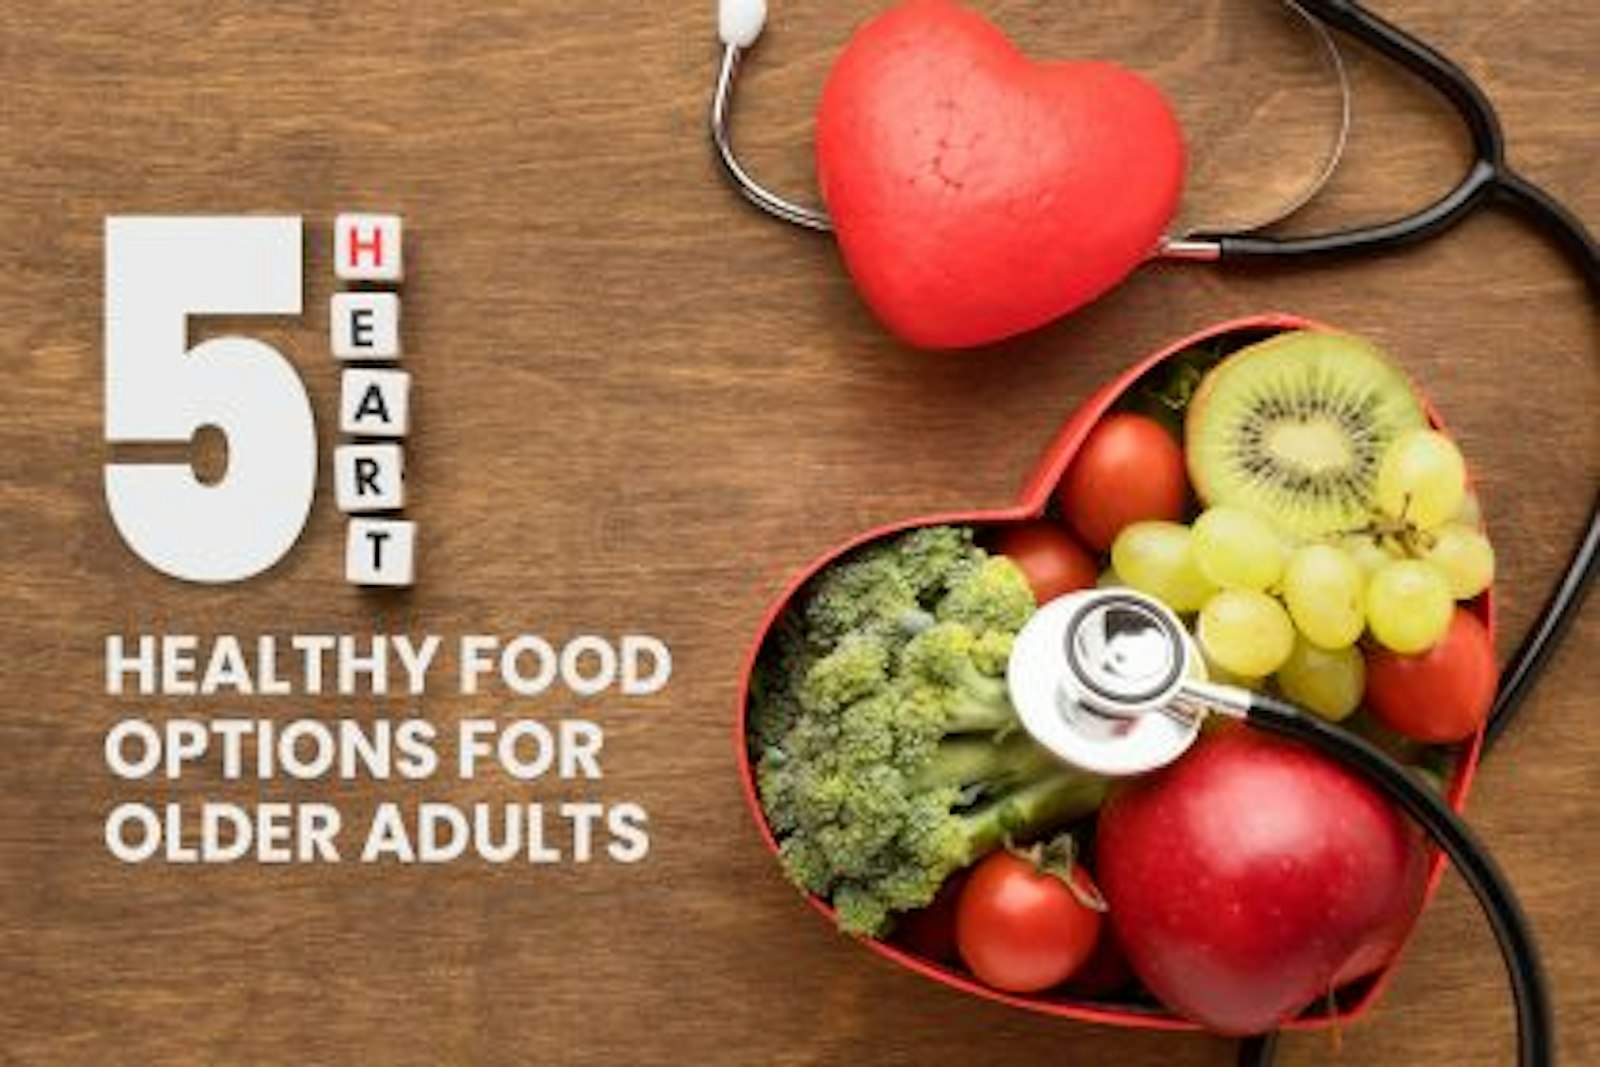 5 Heart-Healthy Food Options for Older Adults